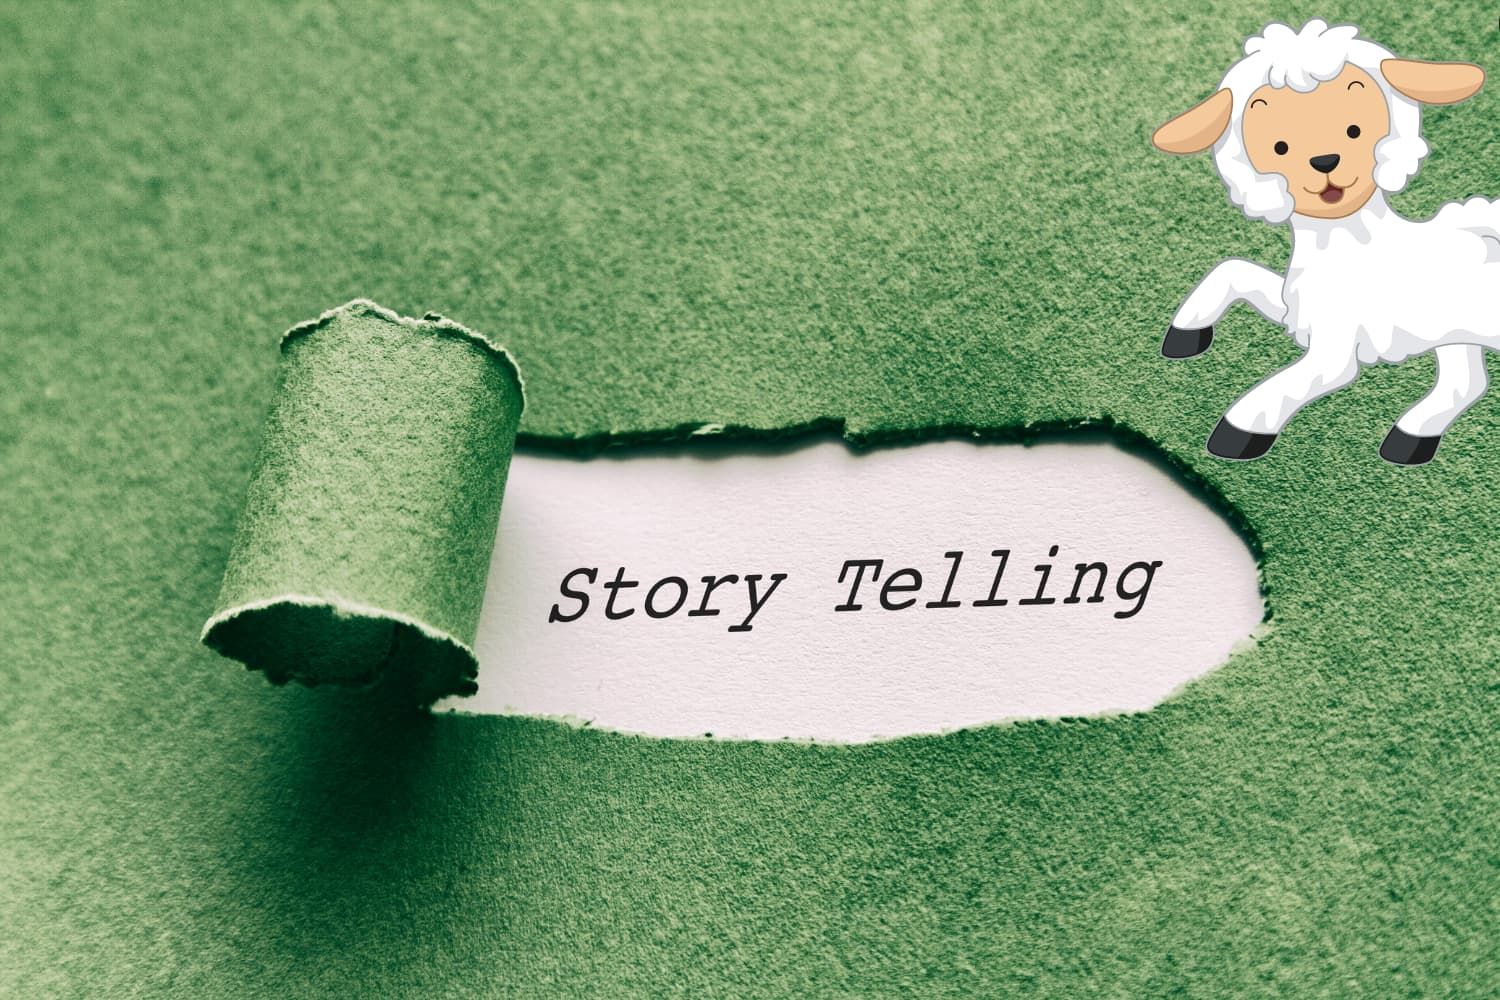 Storytelling%20tips%20-%20NT%20Parable%20of%20the%20lost%20sheep%20-%20Four%20tips%20to%20help%20you%20tell%20the%20story-0b70d295 Caring for each other